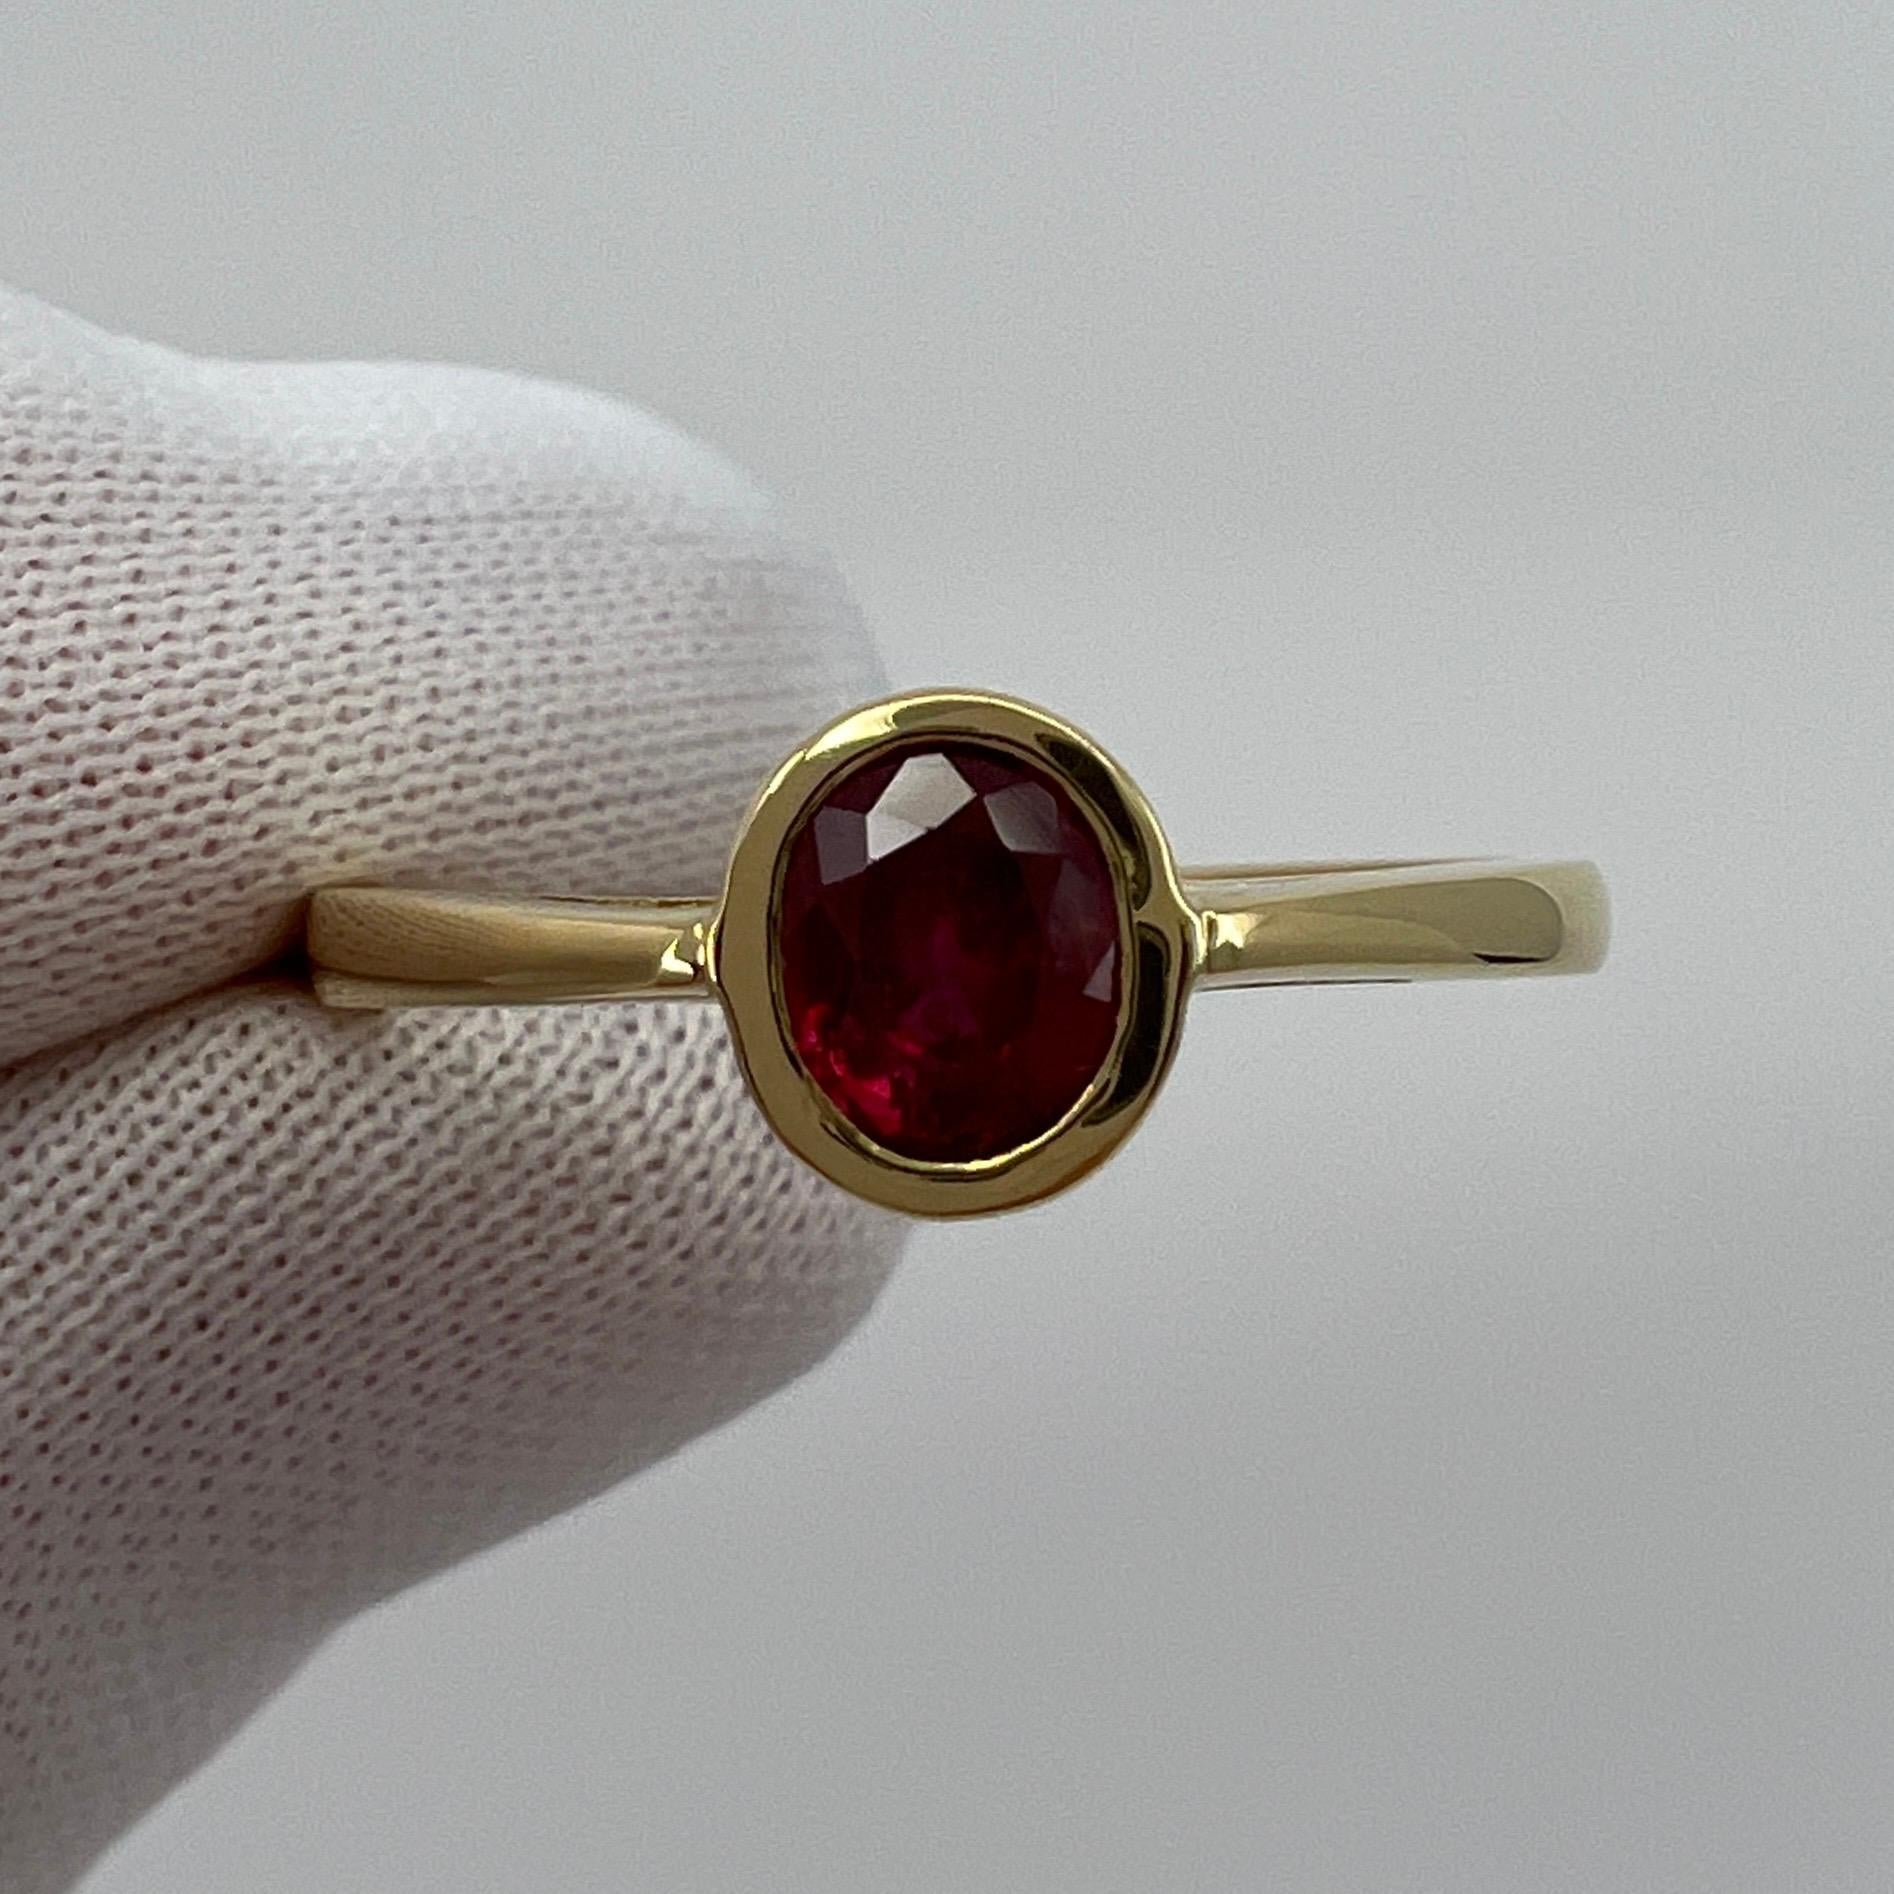 0.75ct Vivid Red Ruby Oval Cut 18k Yellow Gold Bezel Rubover Solitaire Ring For Sale 4